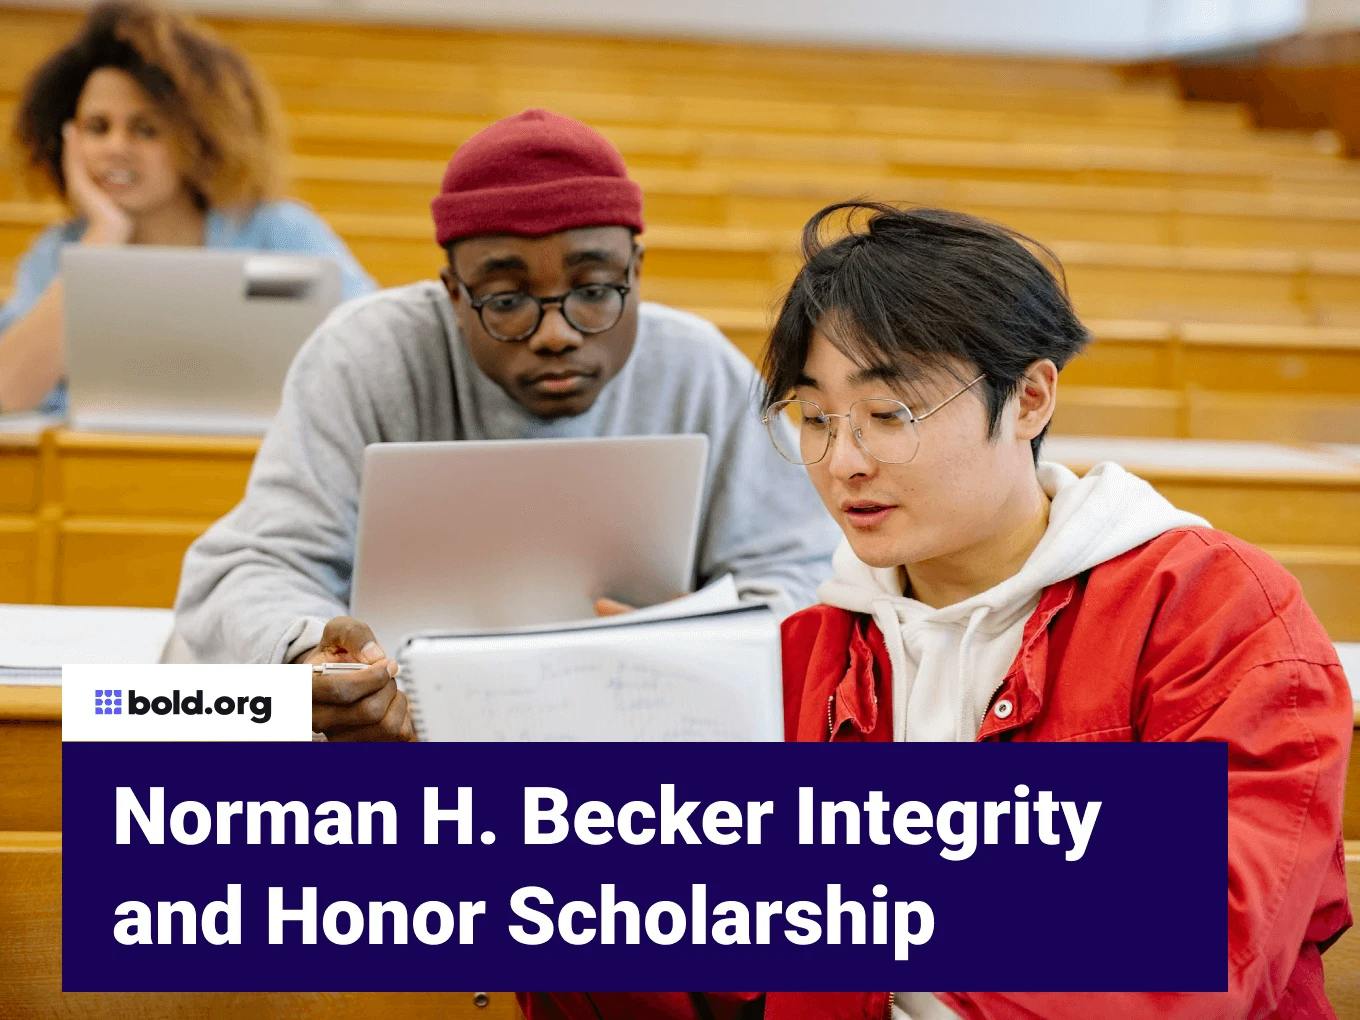 Norman H. Becker Integrity and Honor Scholarship